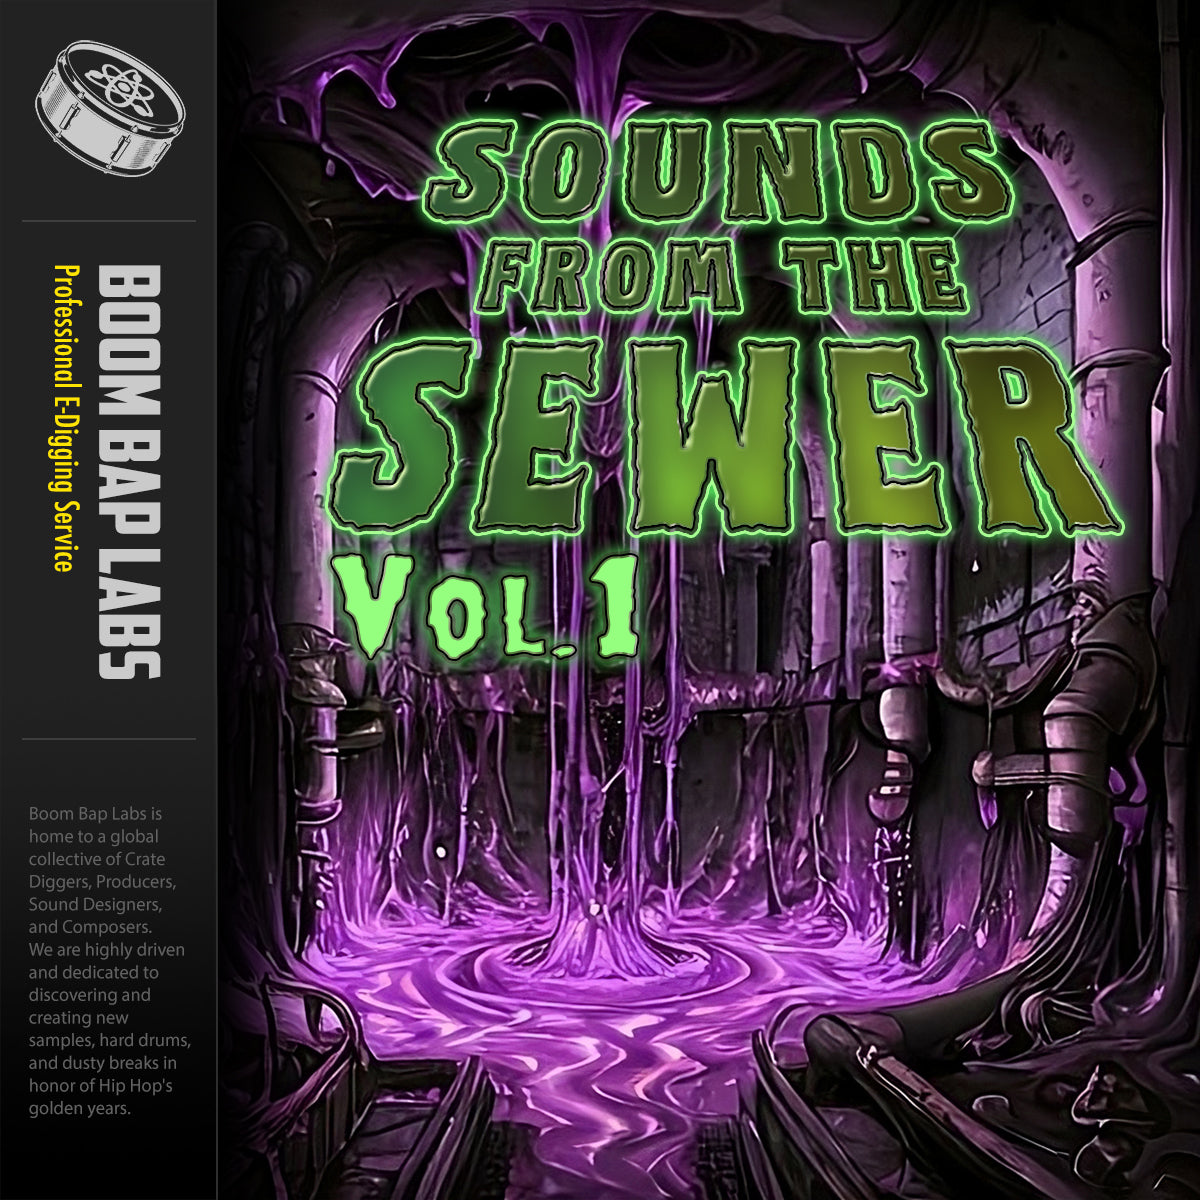 Sounds From The Sewer Vol 1